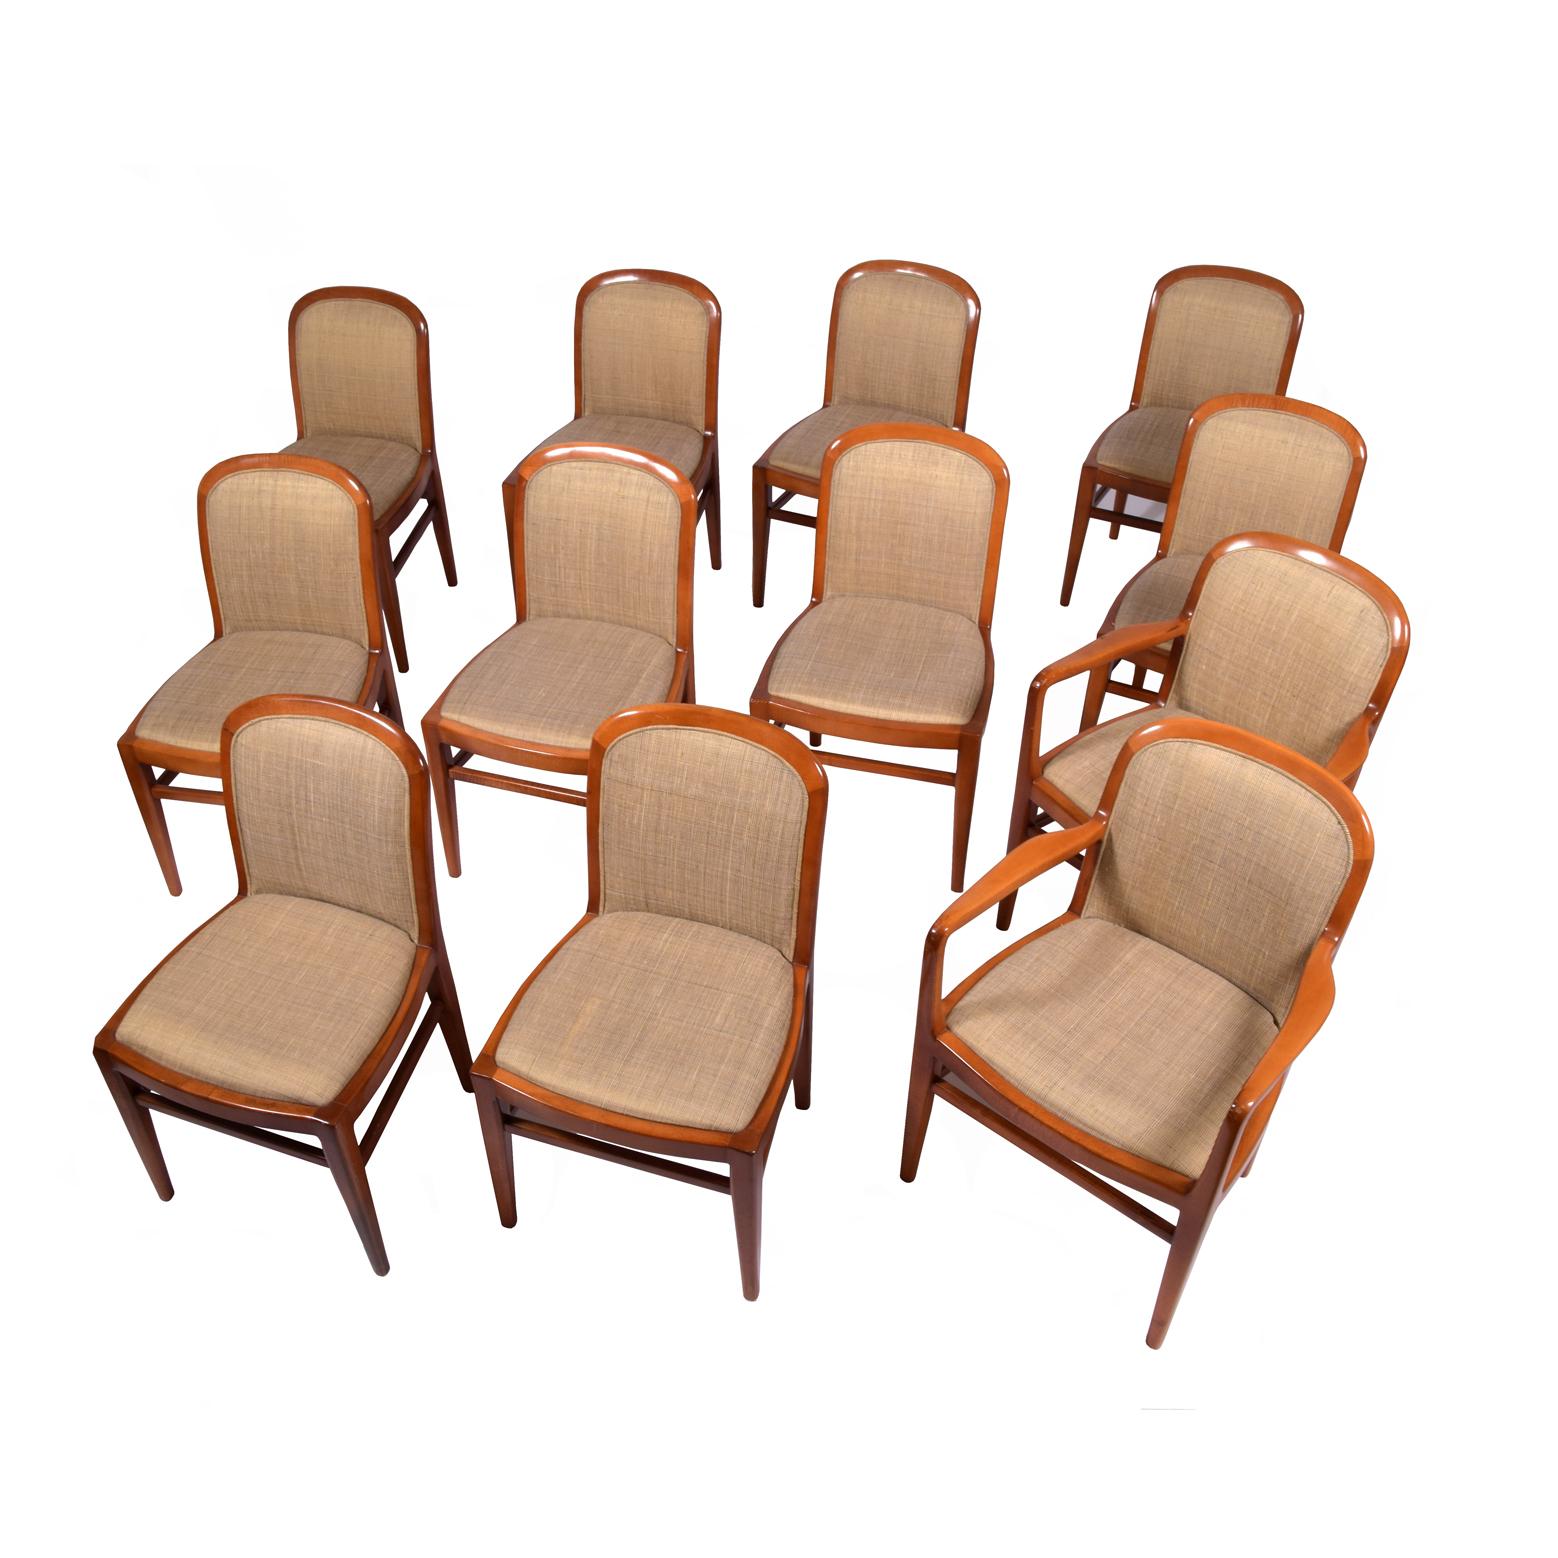 Jack Lenor Larsen 6 sides 2 arm Chairs In Good Condition For Sale In Hudson, NY